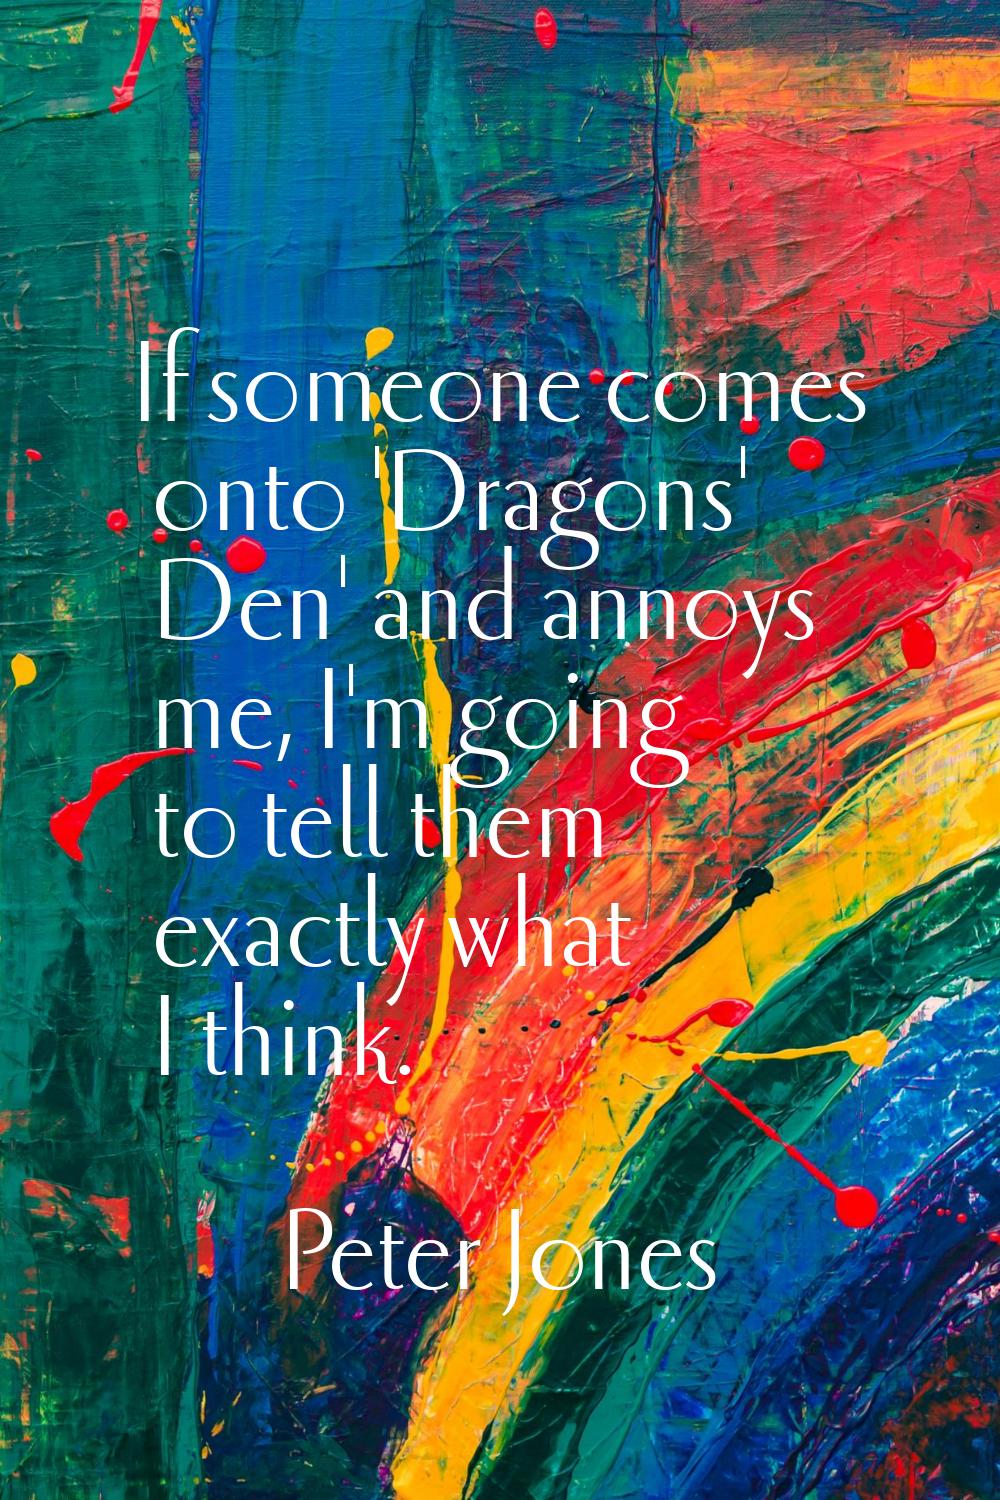 If someone comes onto 'Dragons' Den' and annoys me, I'm going to tell them exactly what I think.